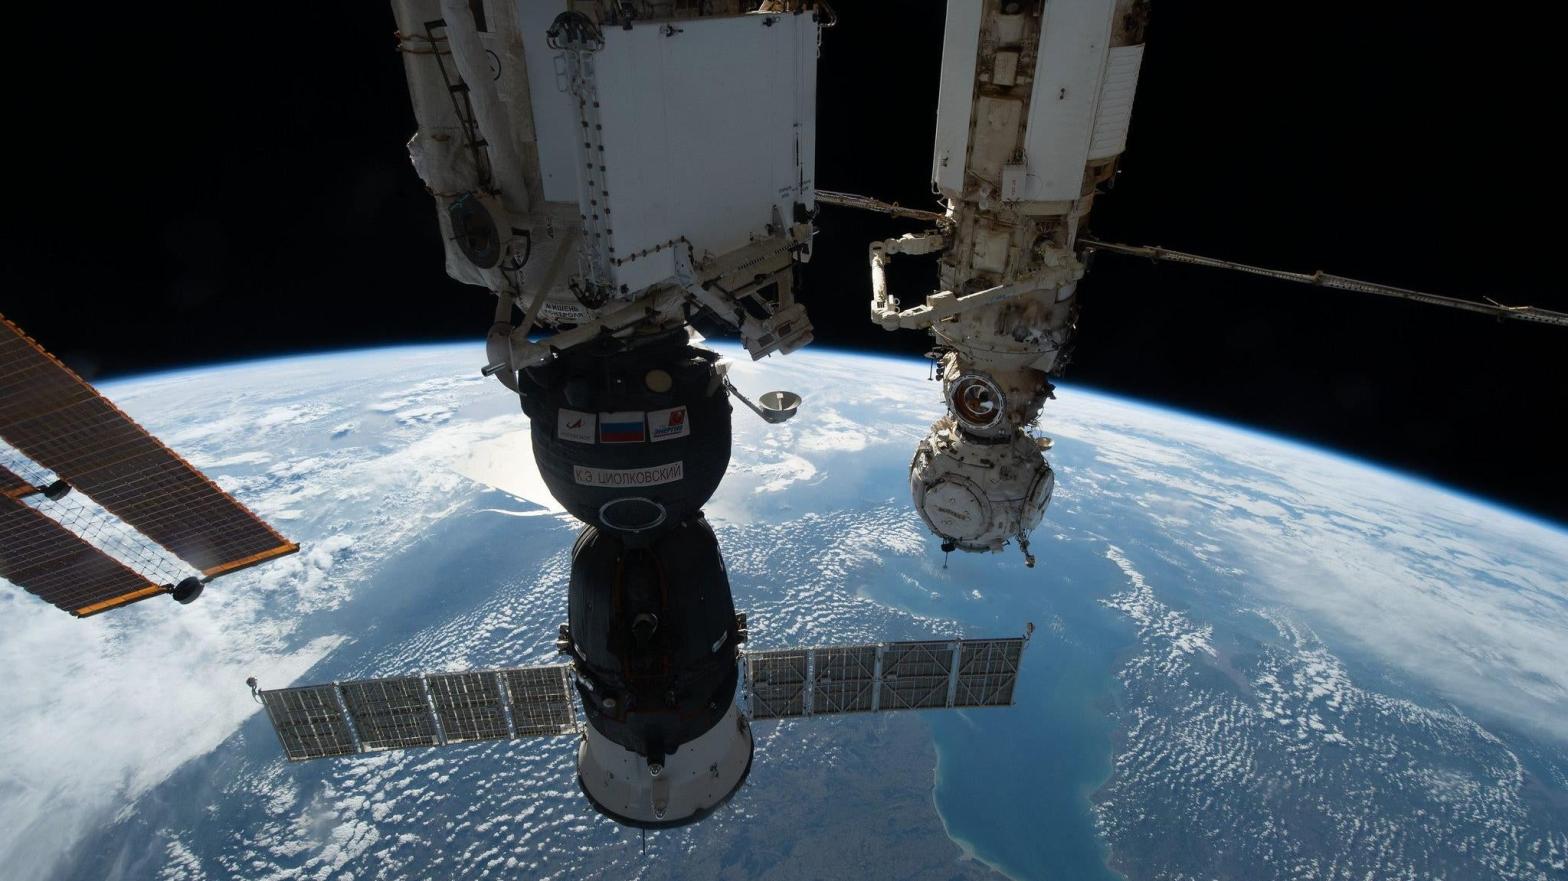 The Soyuz MS-22 spacecraft docked to the Russian Rassvet ISS module, in a photo taken on October 8, 2022. (Photo: NASA)